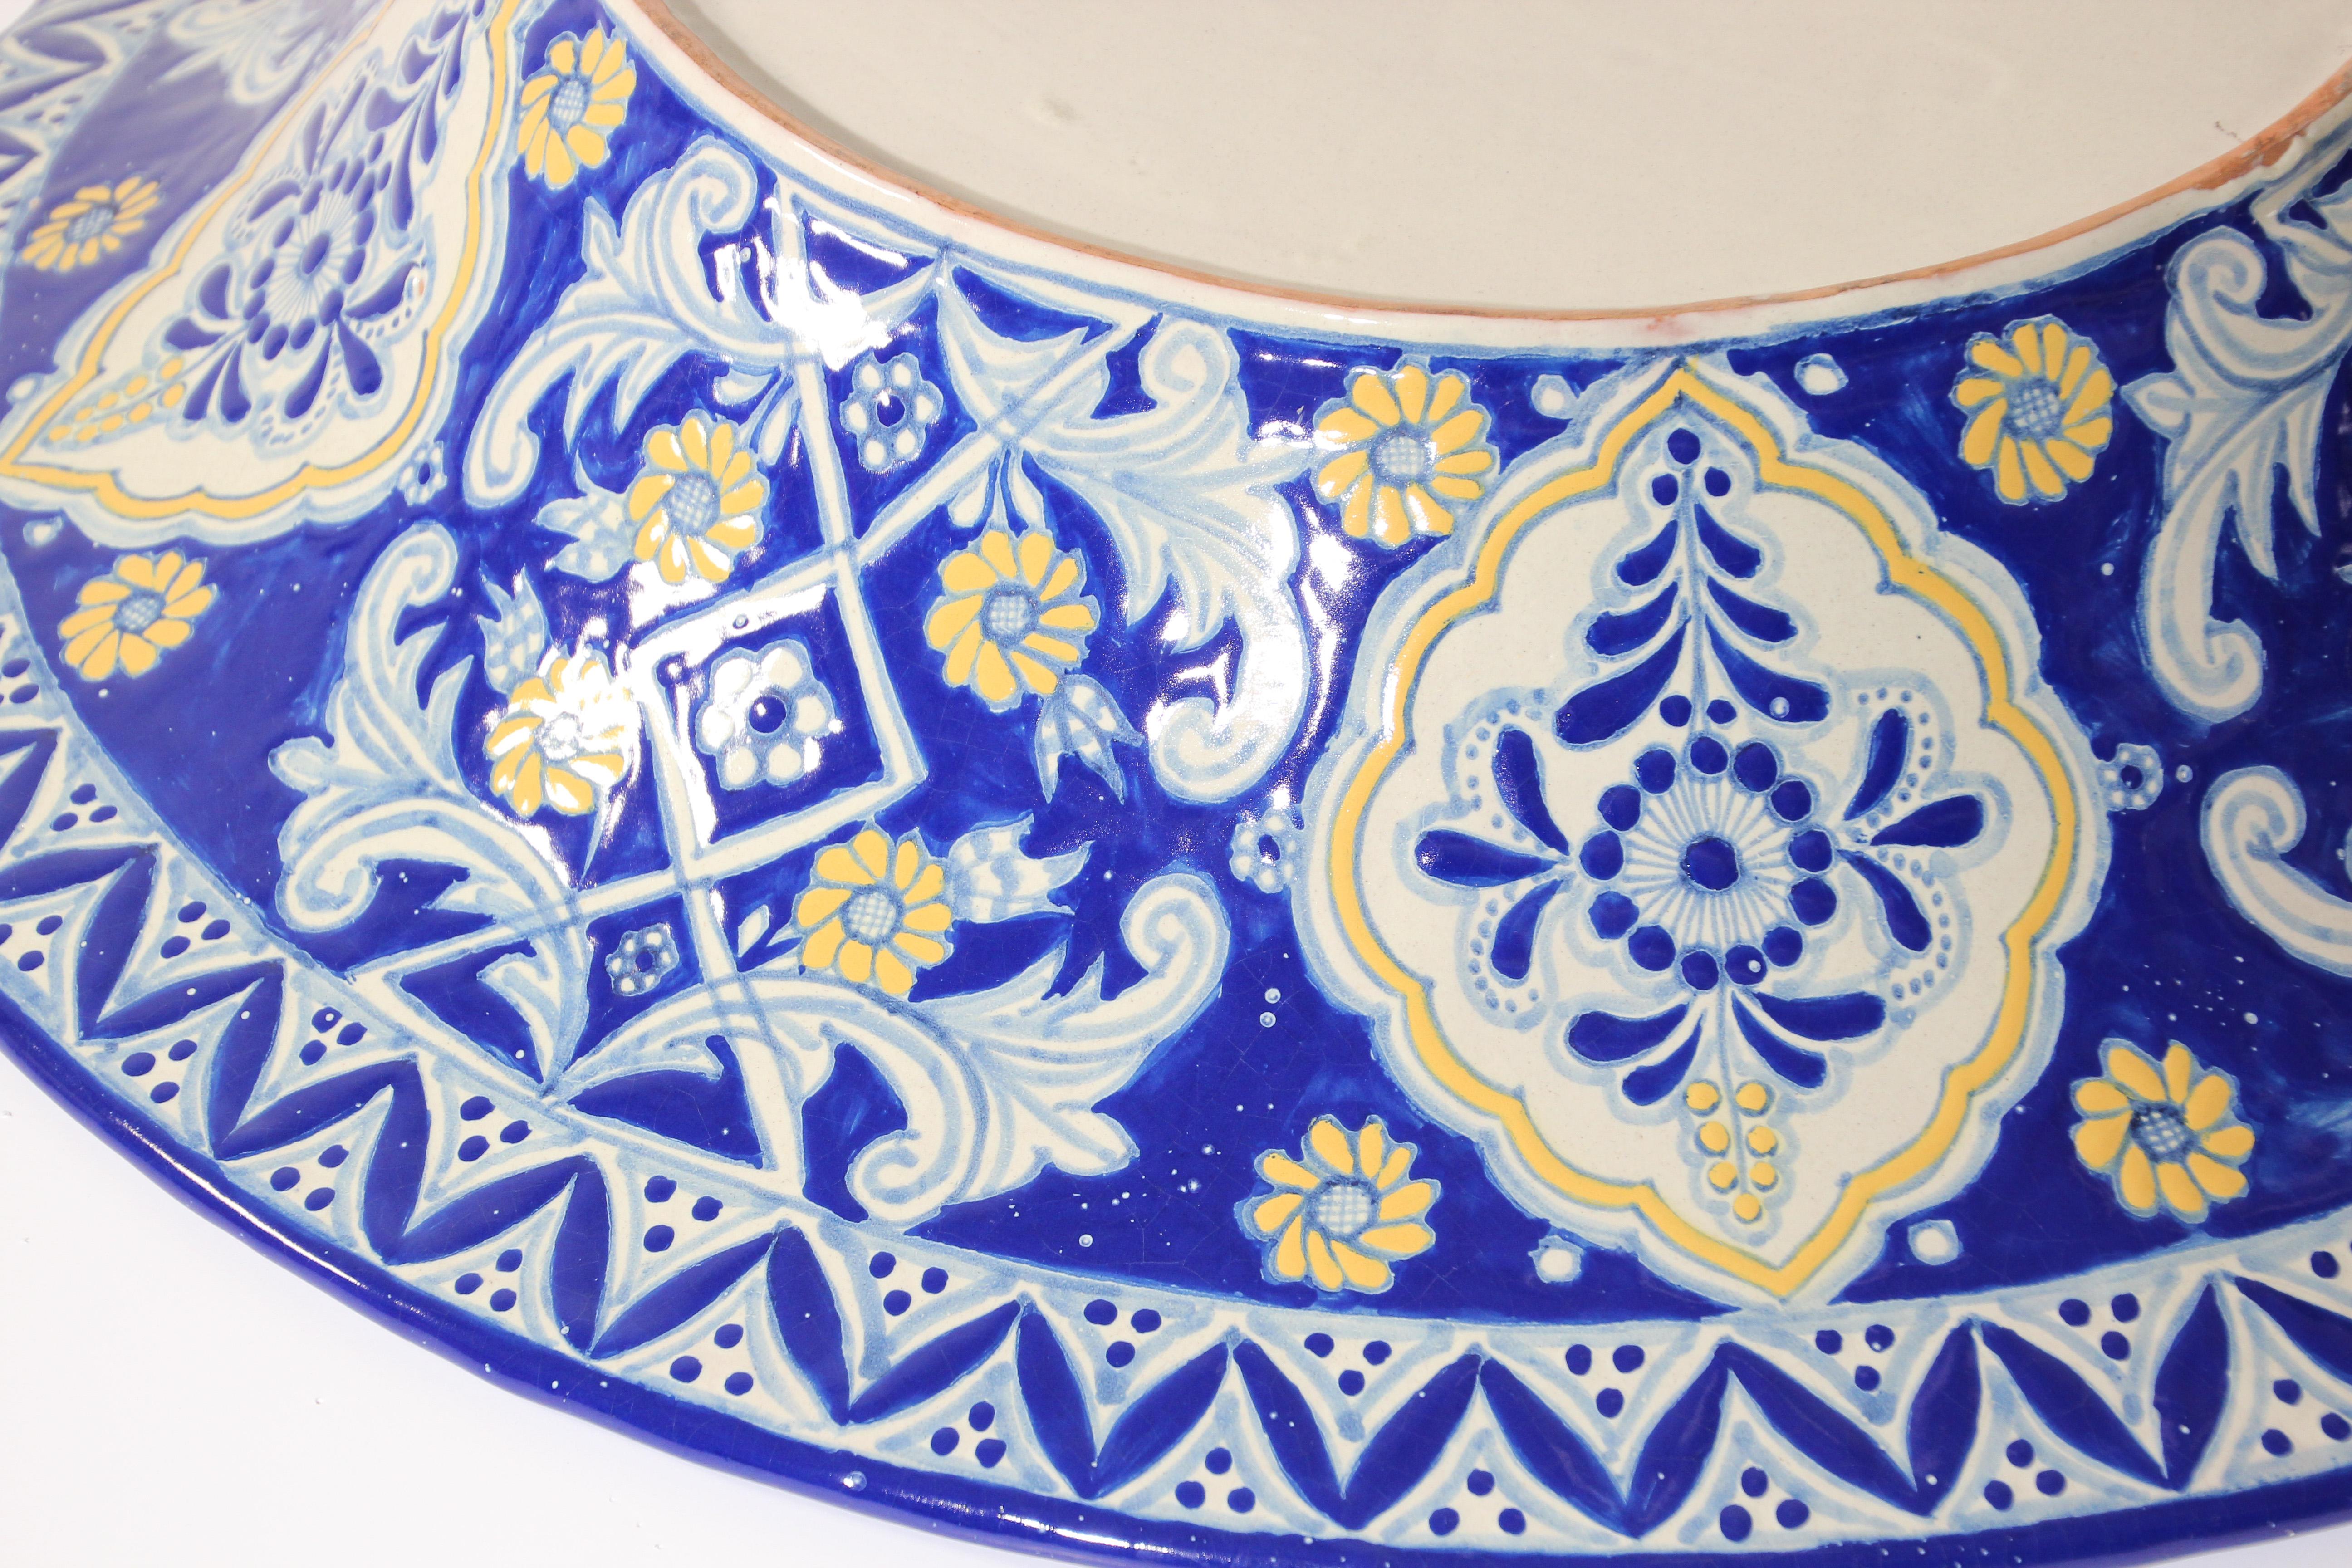 Oversized Blue and White Mexican Talavera Glazed Ceramic Bowl For Sale 2